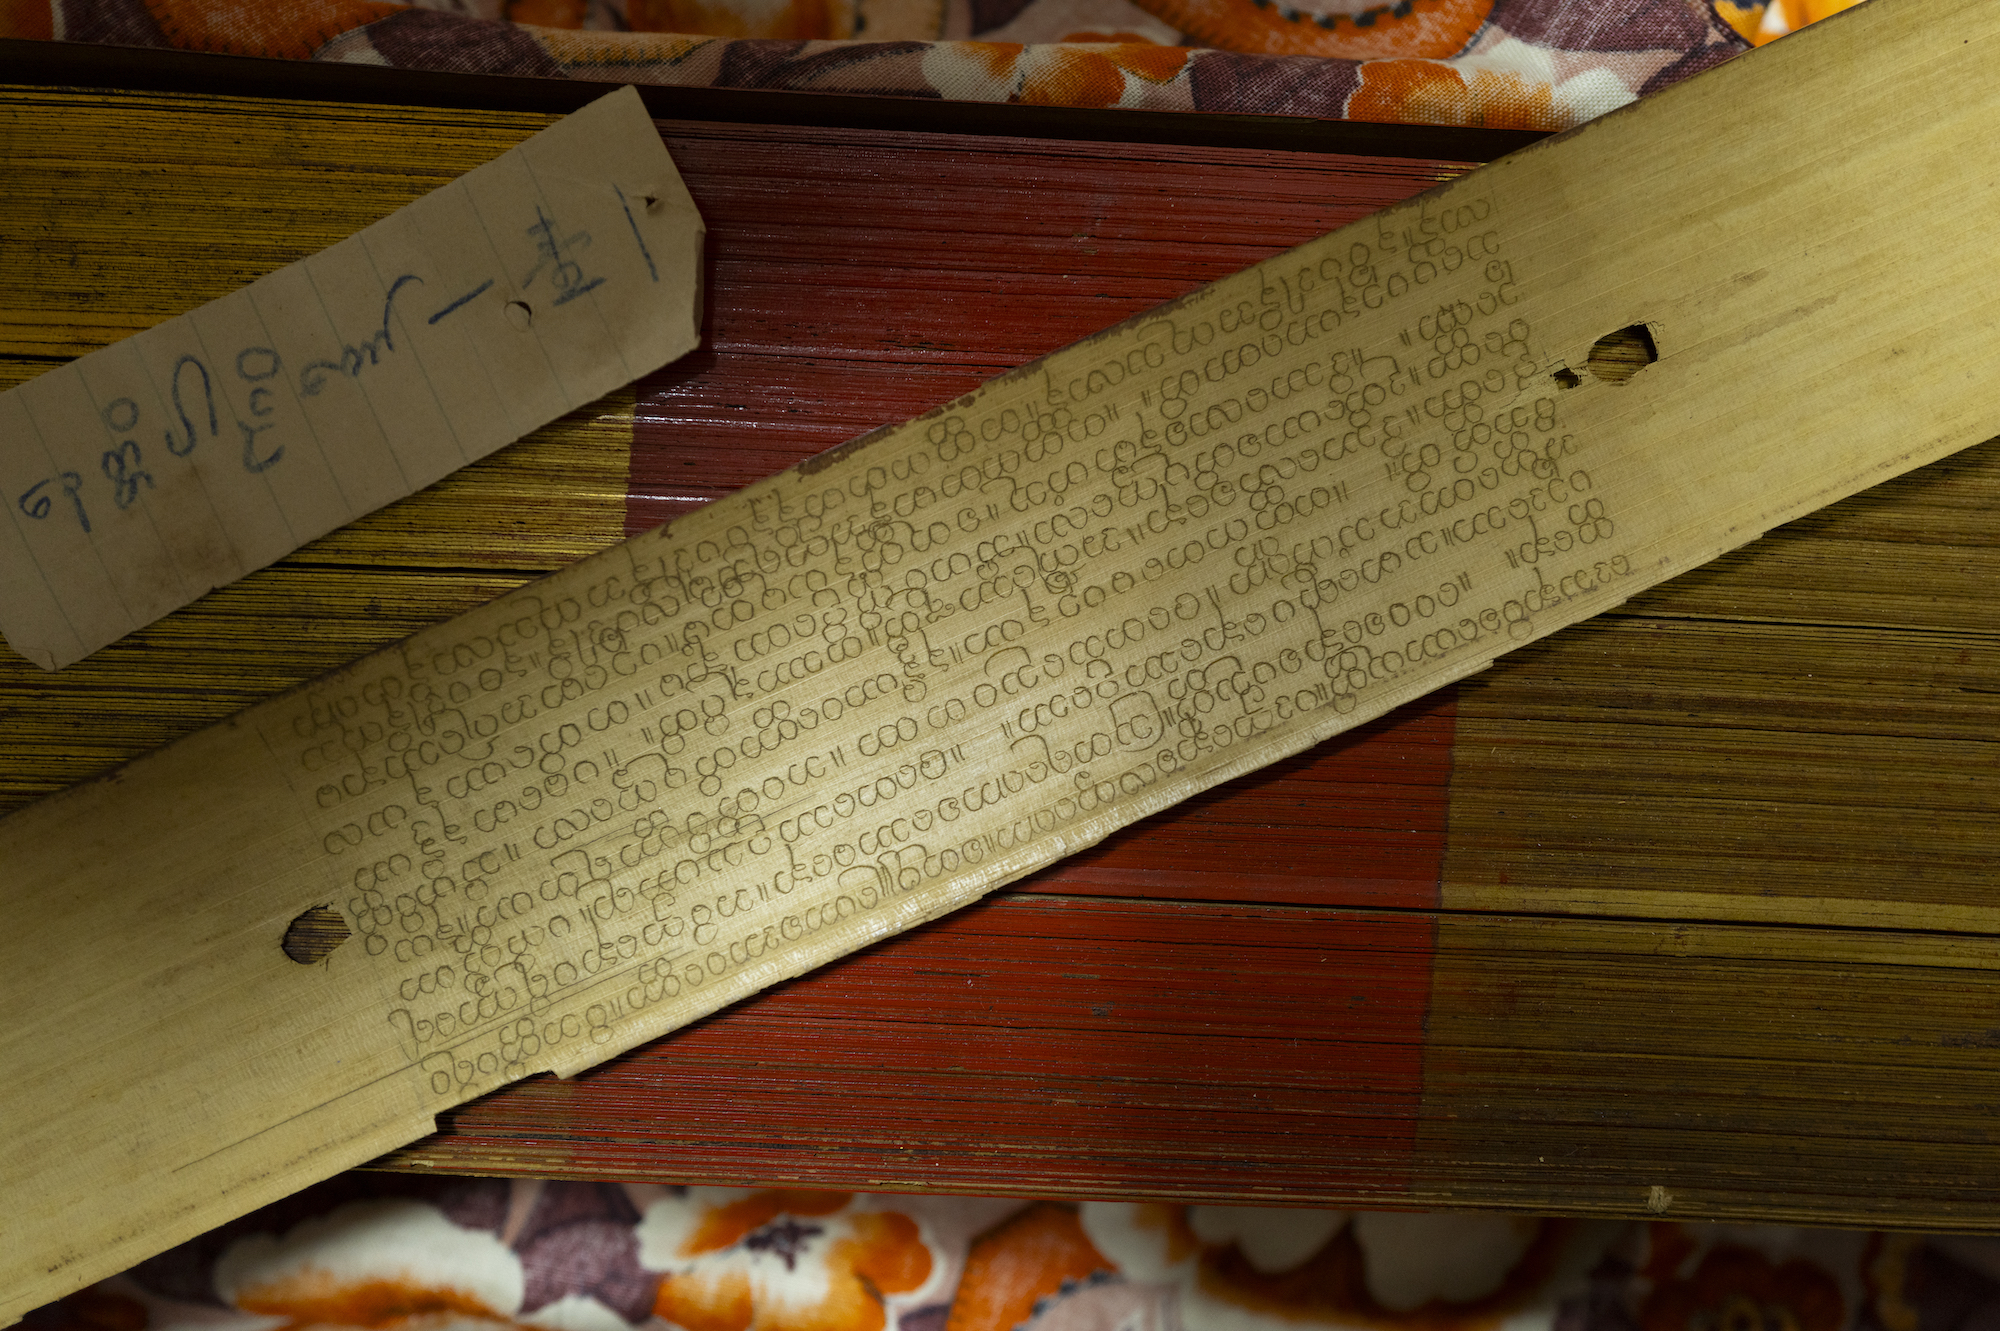 Palm-leaf scriptures in the Kong Tac Lam archives